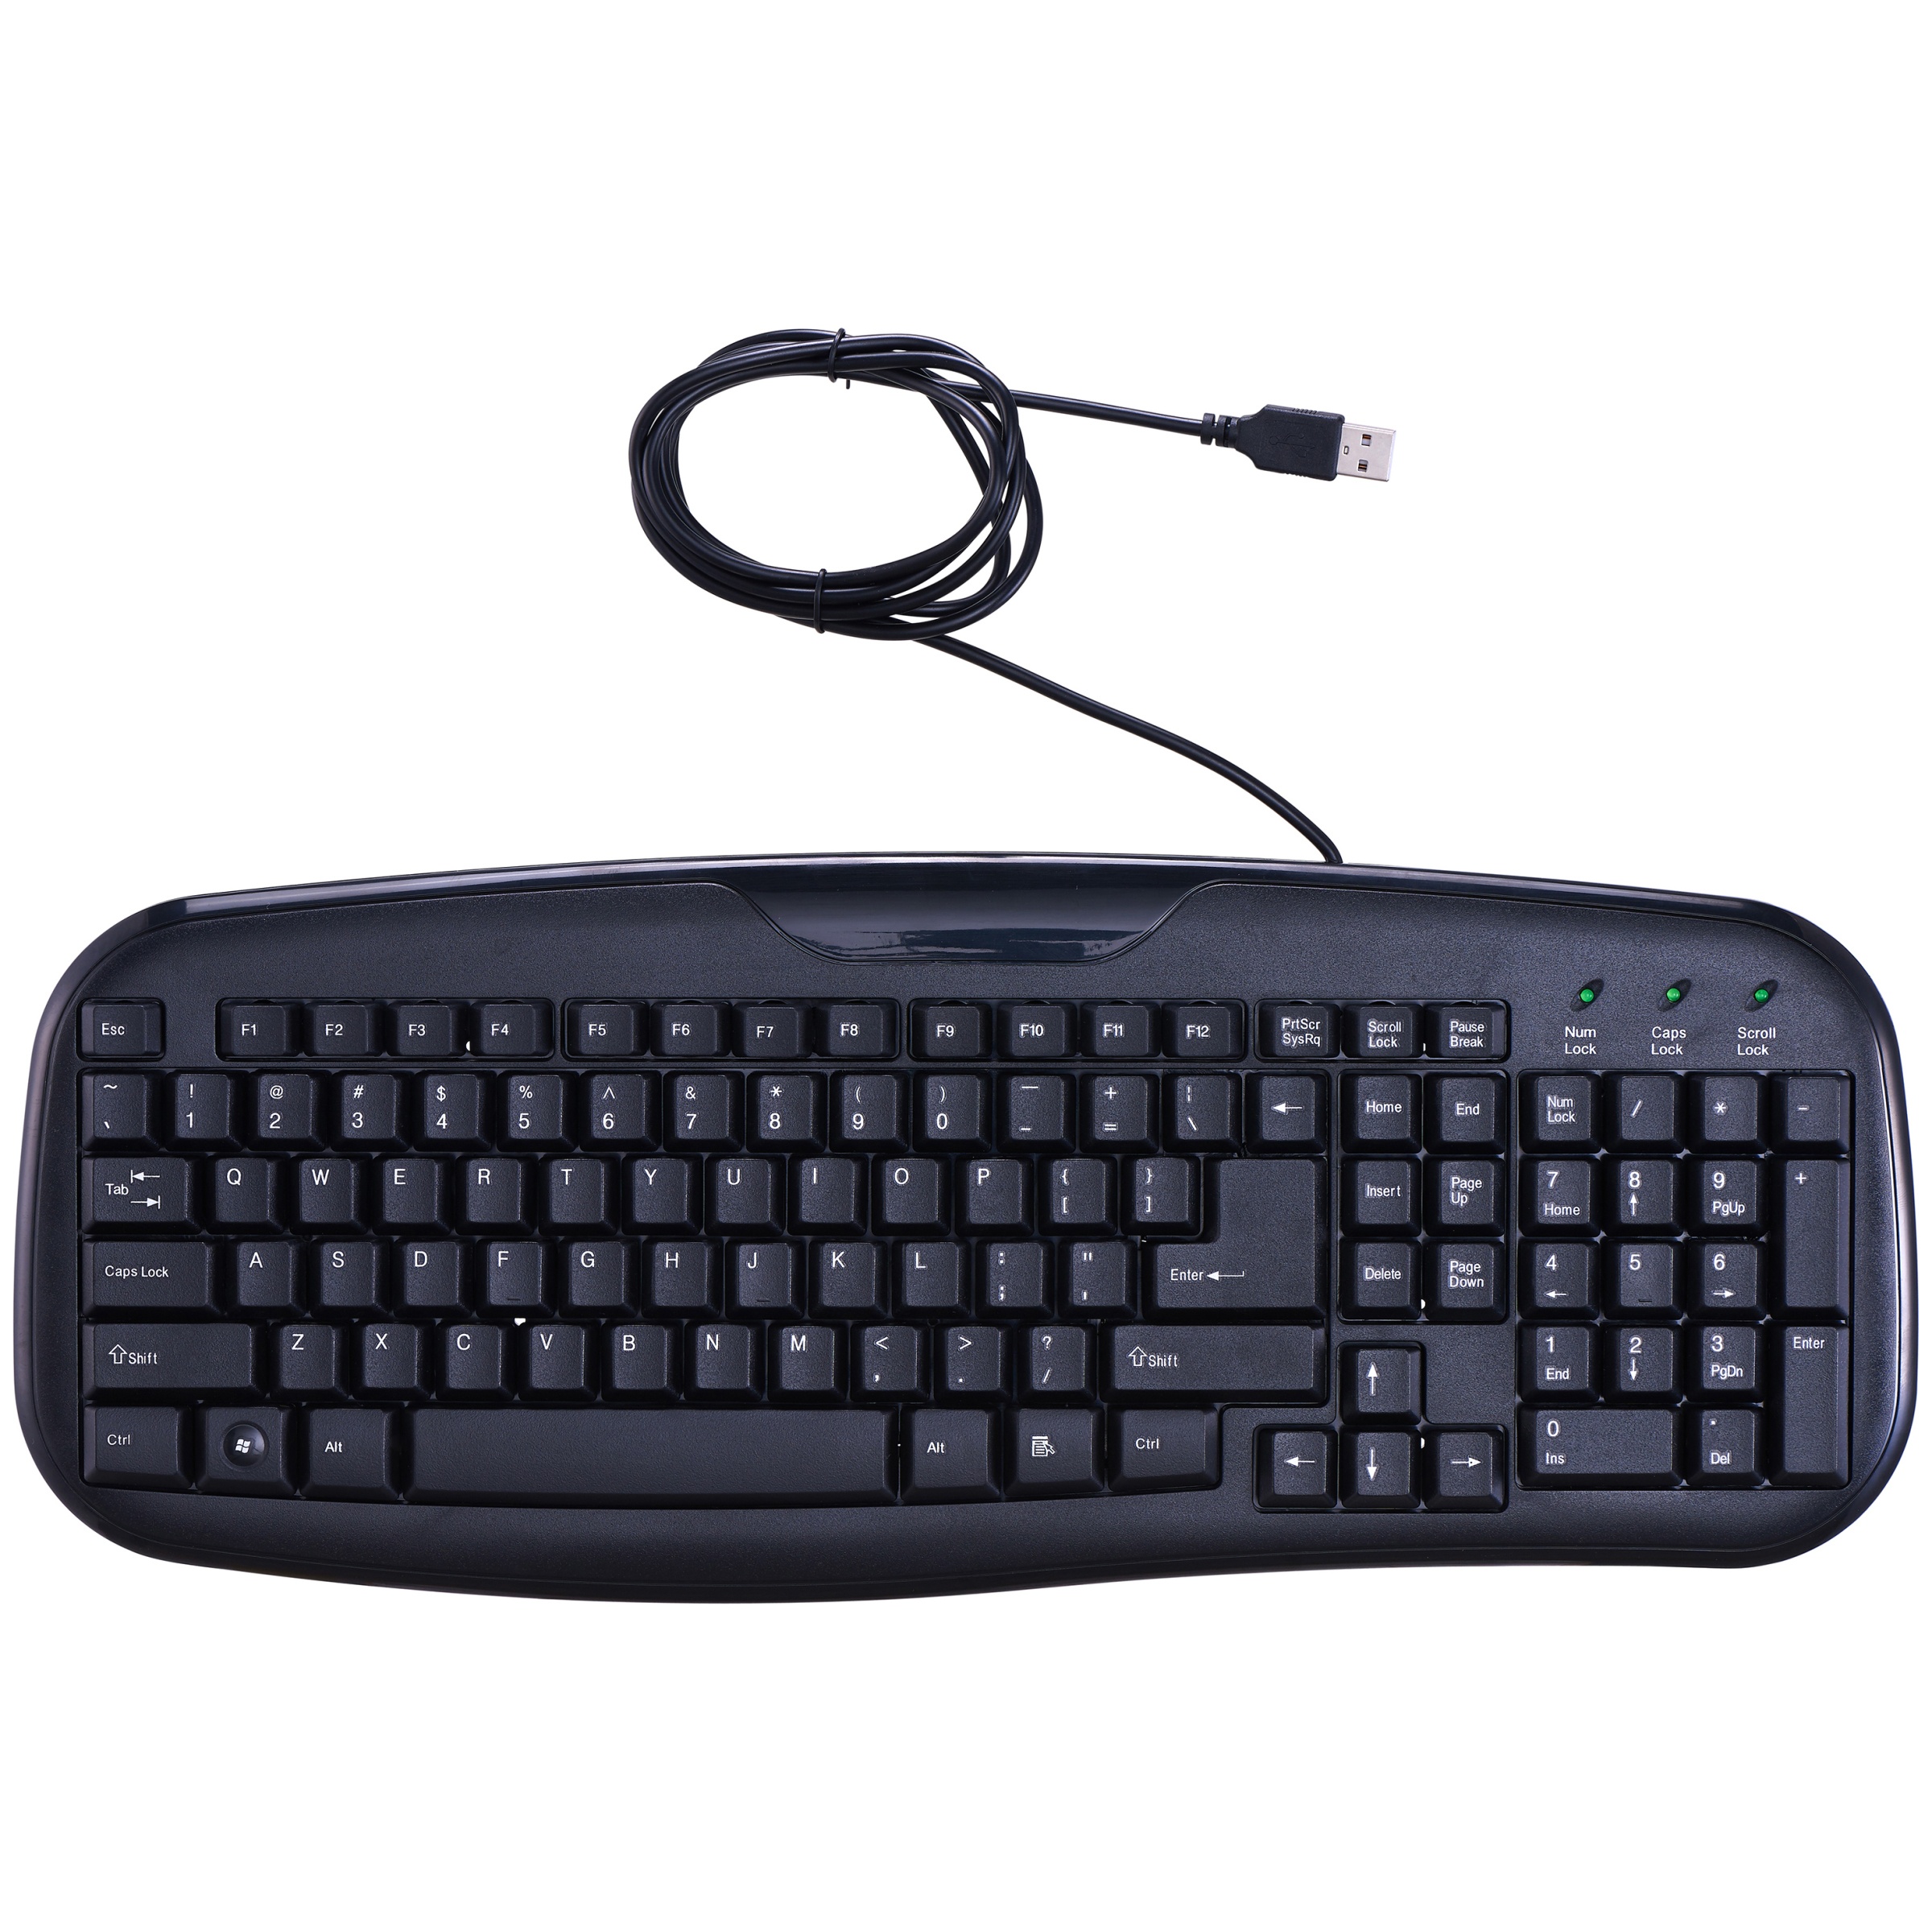 Onn Usb Connected Soft-Touch Wired Keyboard, Black - image 4 of 4